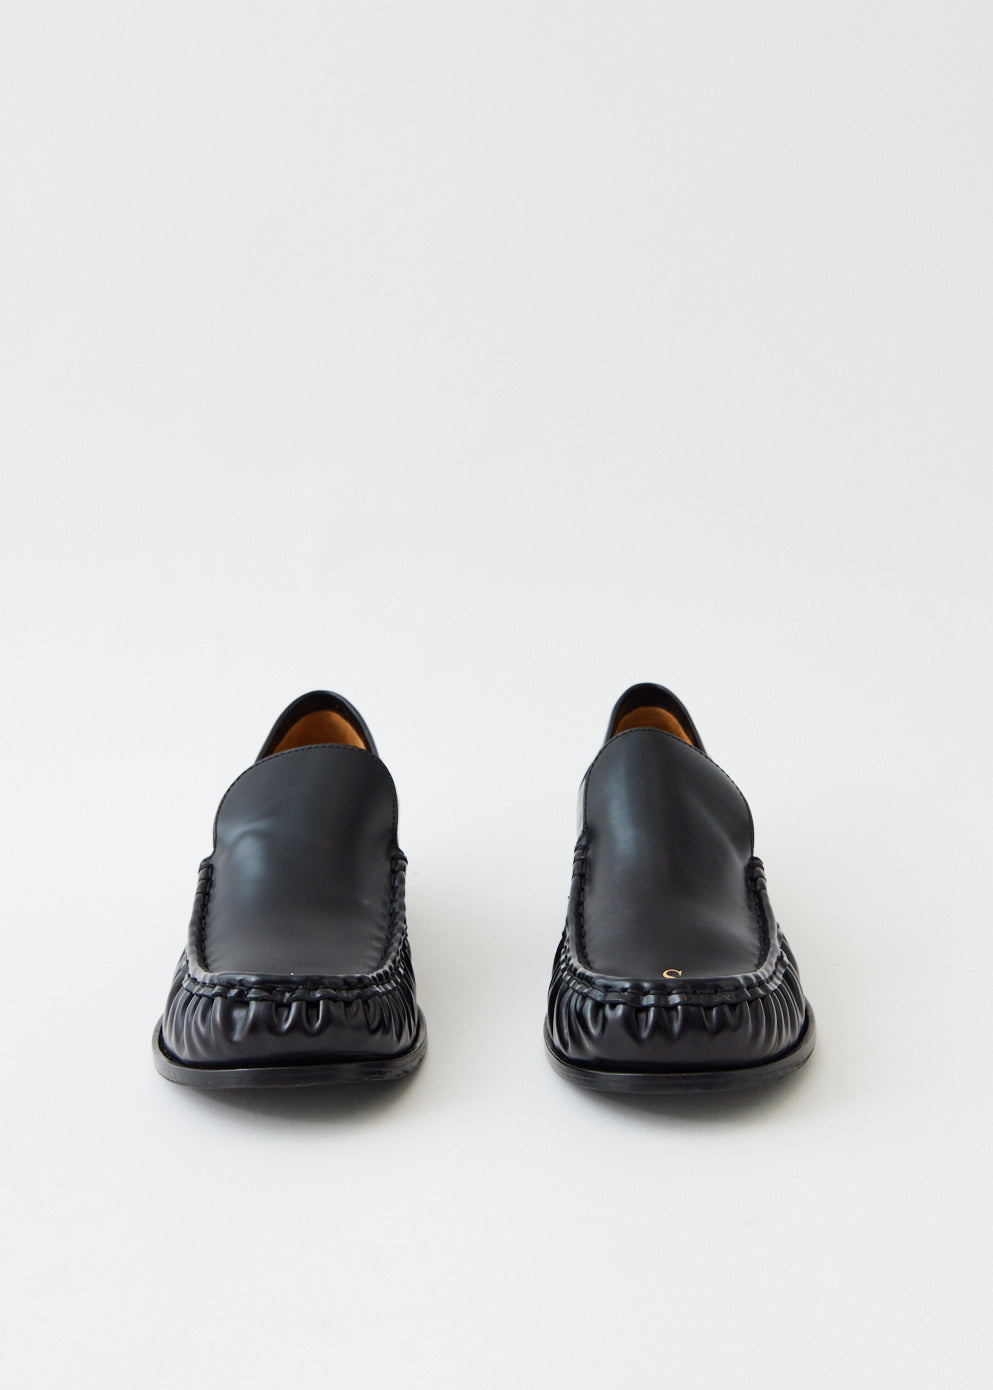 Babi Due Loafers